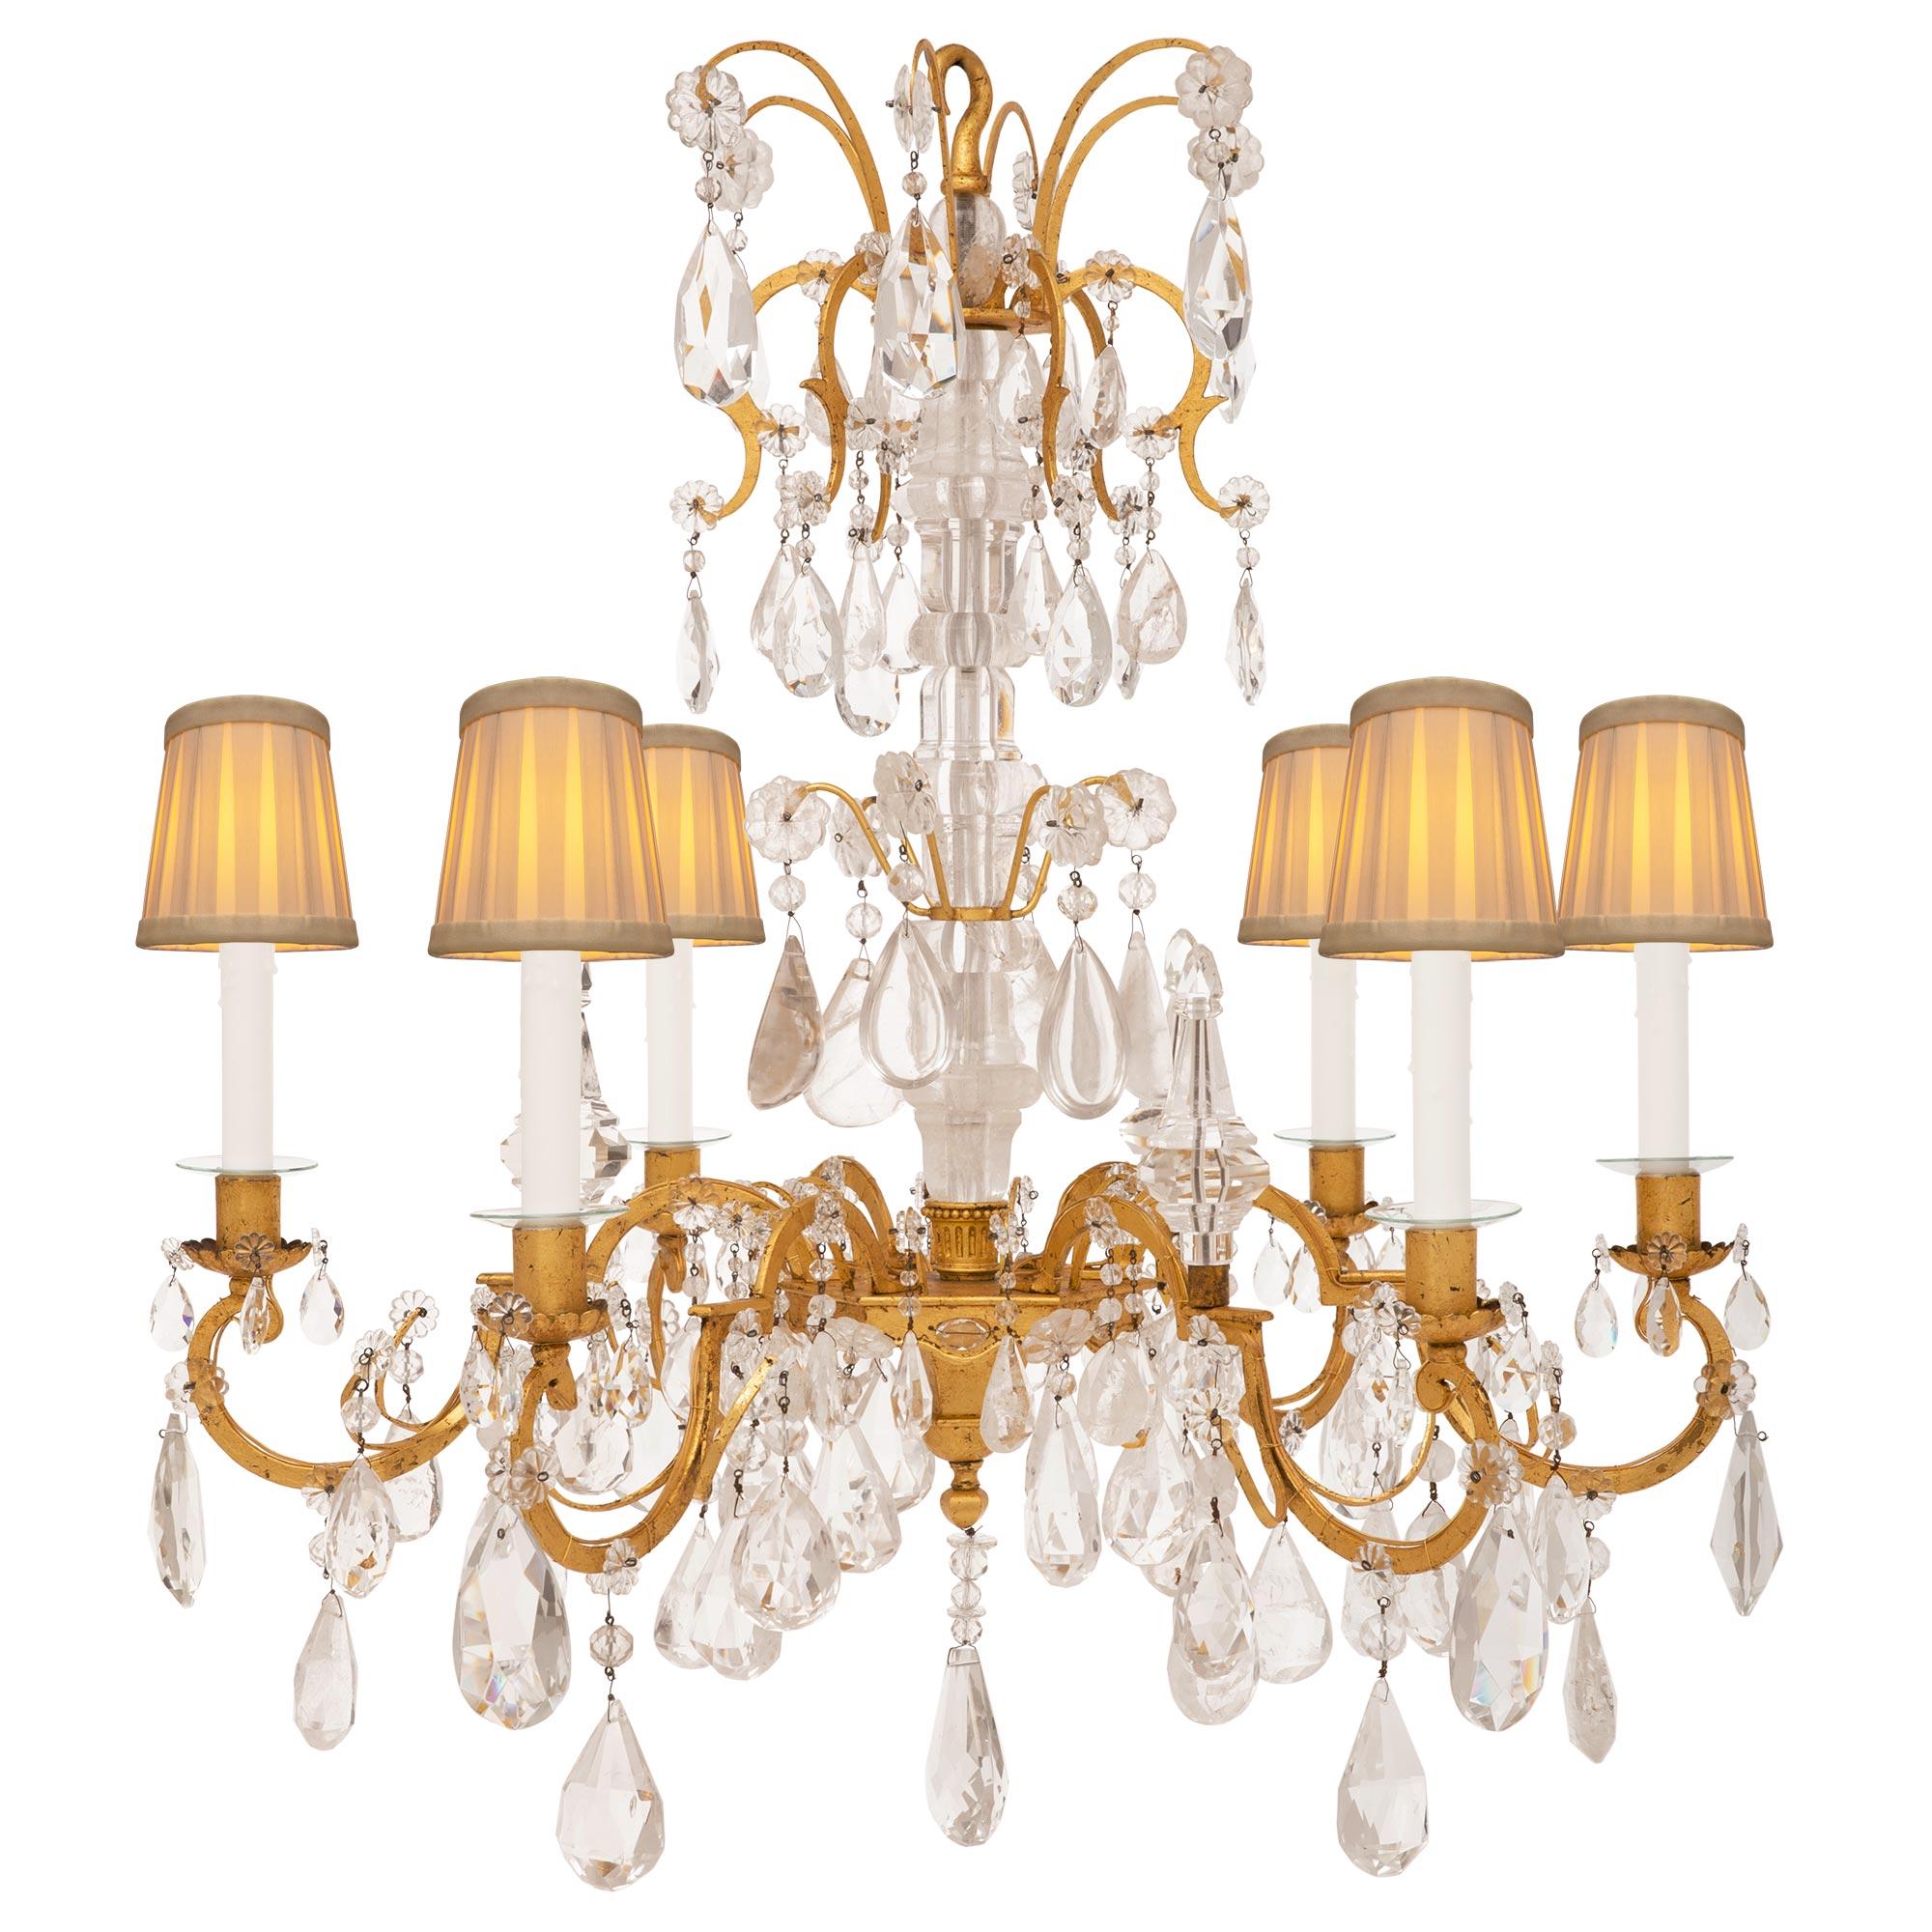 French 19th Century Louis XV St. Gilt Metal and Rock Crystal Chandelier For Sale